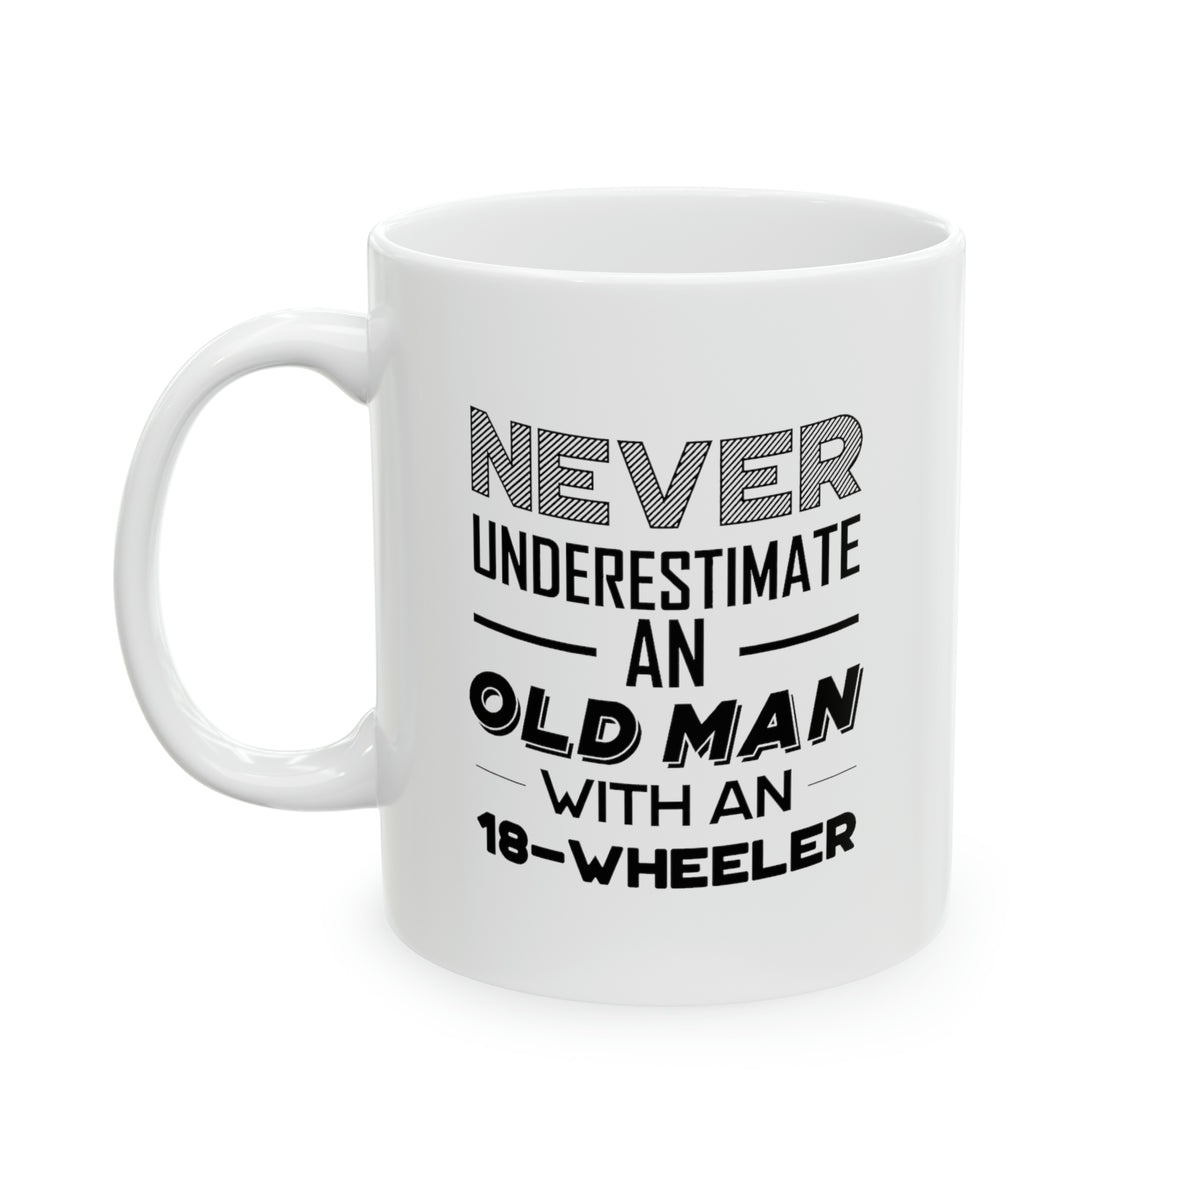 Trucker Coffee Mug - Never Underestimate An Old Man With An 18-Wheeler - Great Gift For Trucker